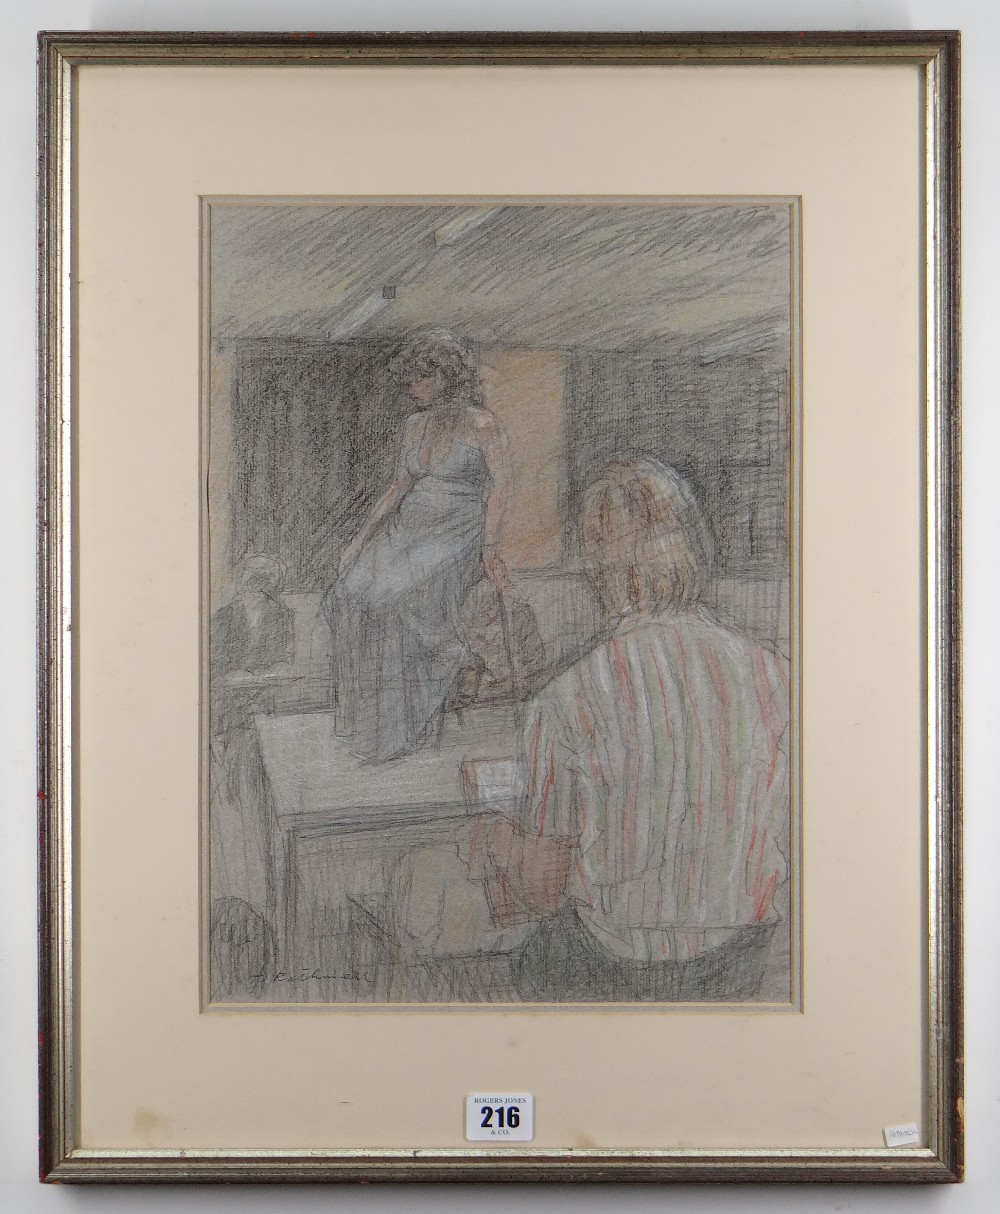 THOMAS RATHMELL pencil drawing - figures in a life-drawing class with model on a chair, signed, 37 x - Image 2 of 2